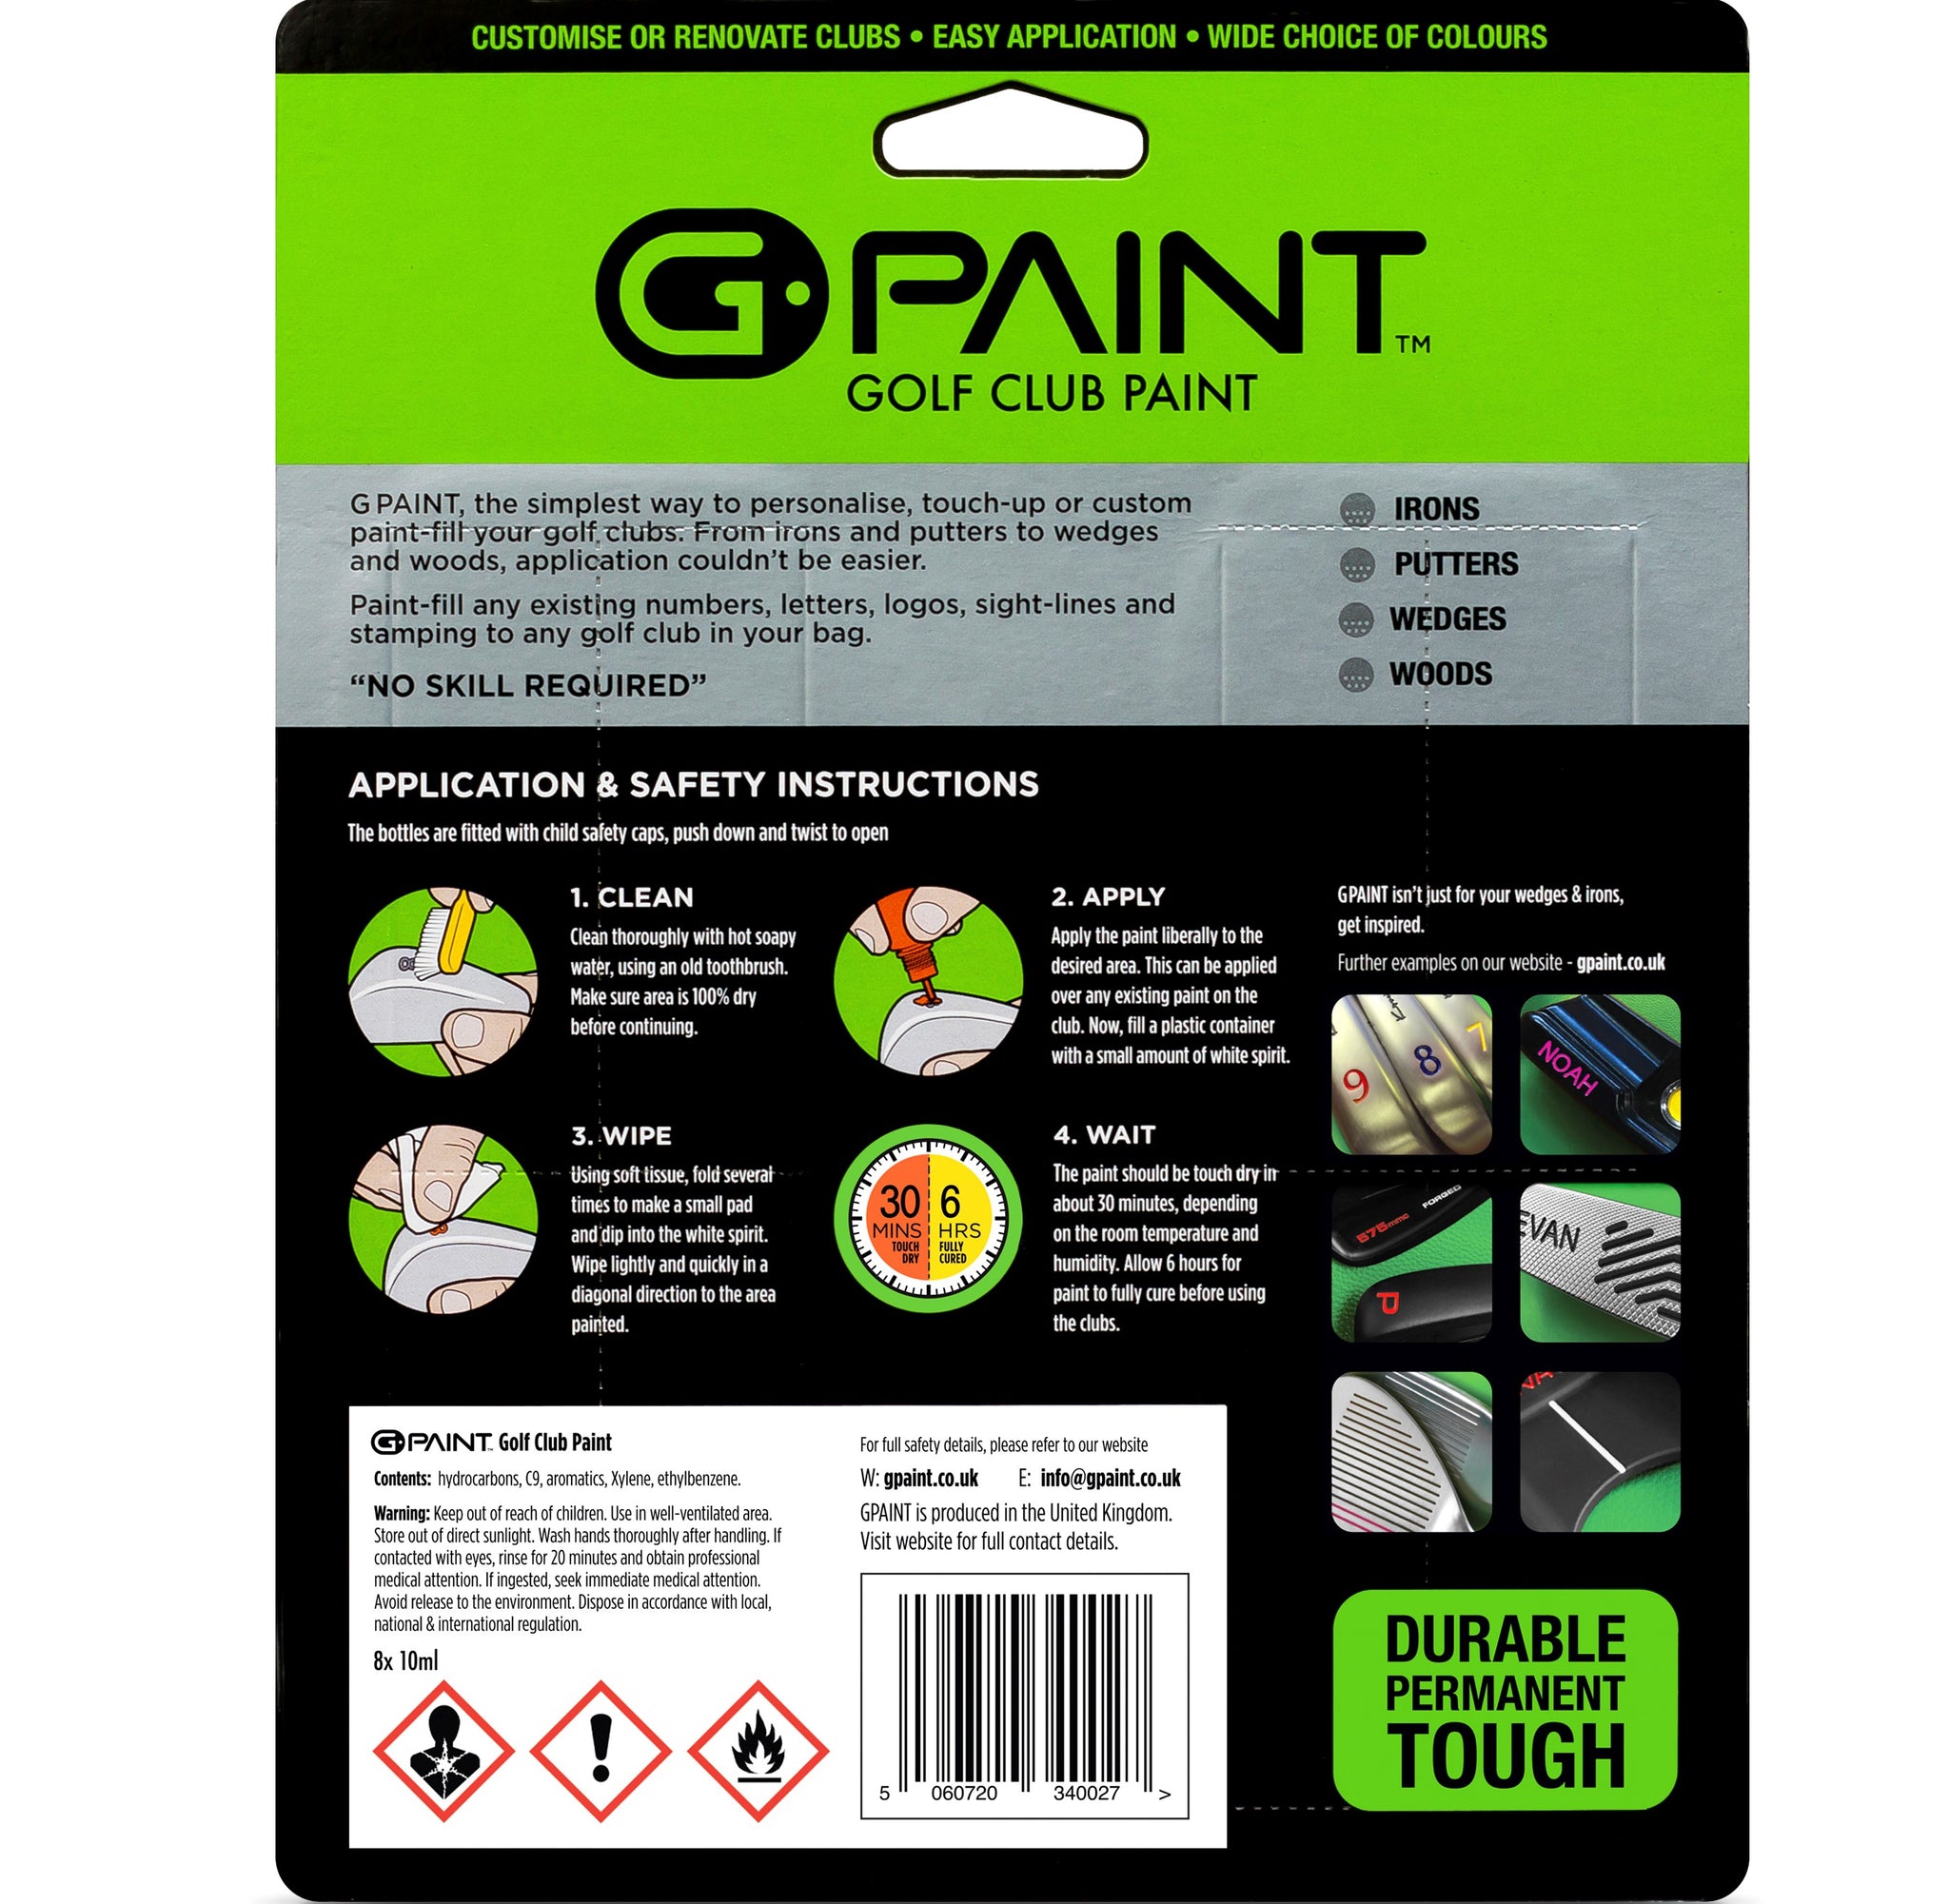 G-Paint Golf Club Paint - Touch Up, Fill In, Customise or Renovate Your  Clubs - 4 Pack of 10ml Bottles. Yellow, Pink, Orange & Green